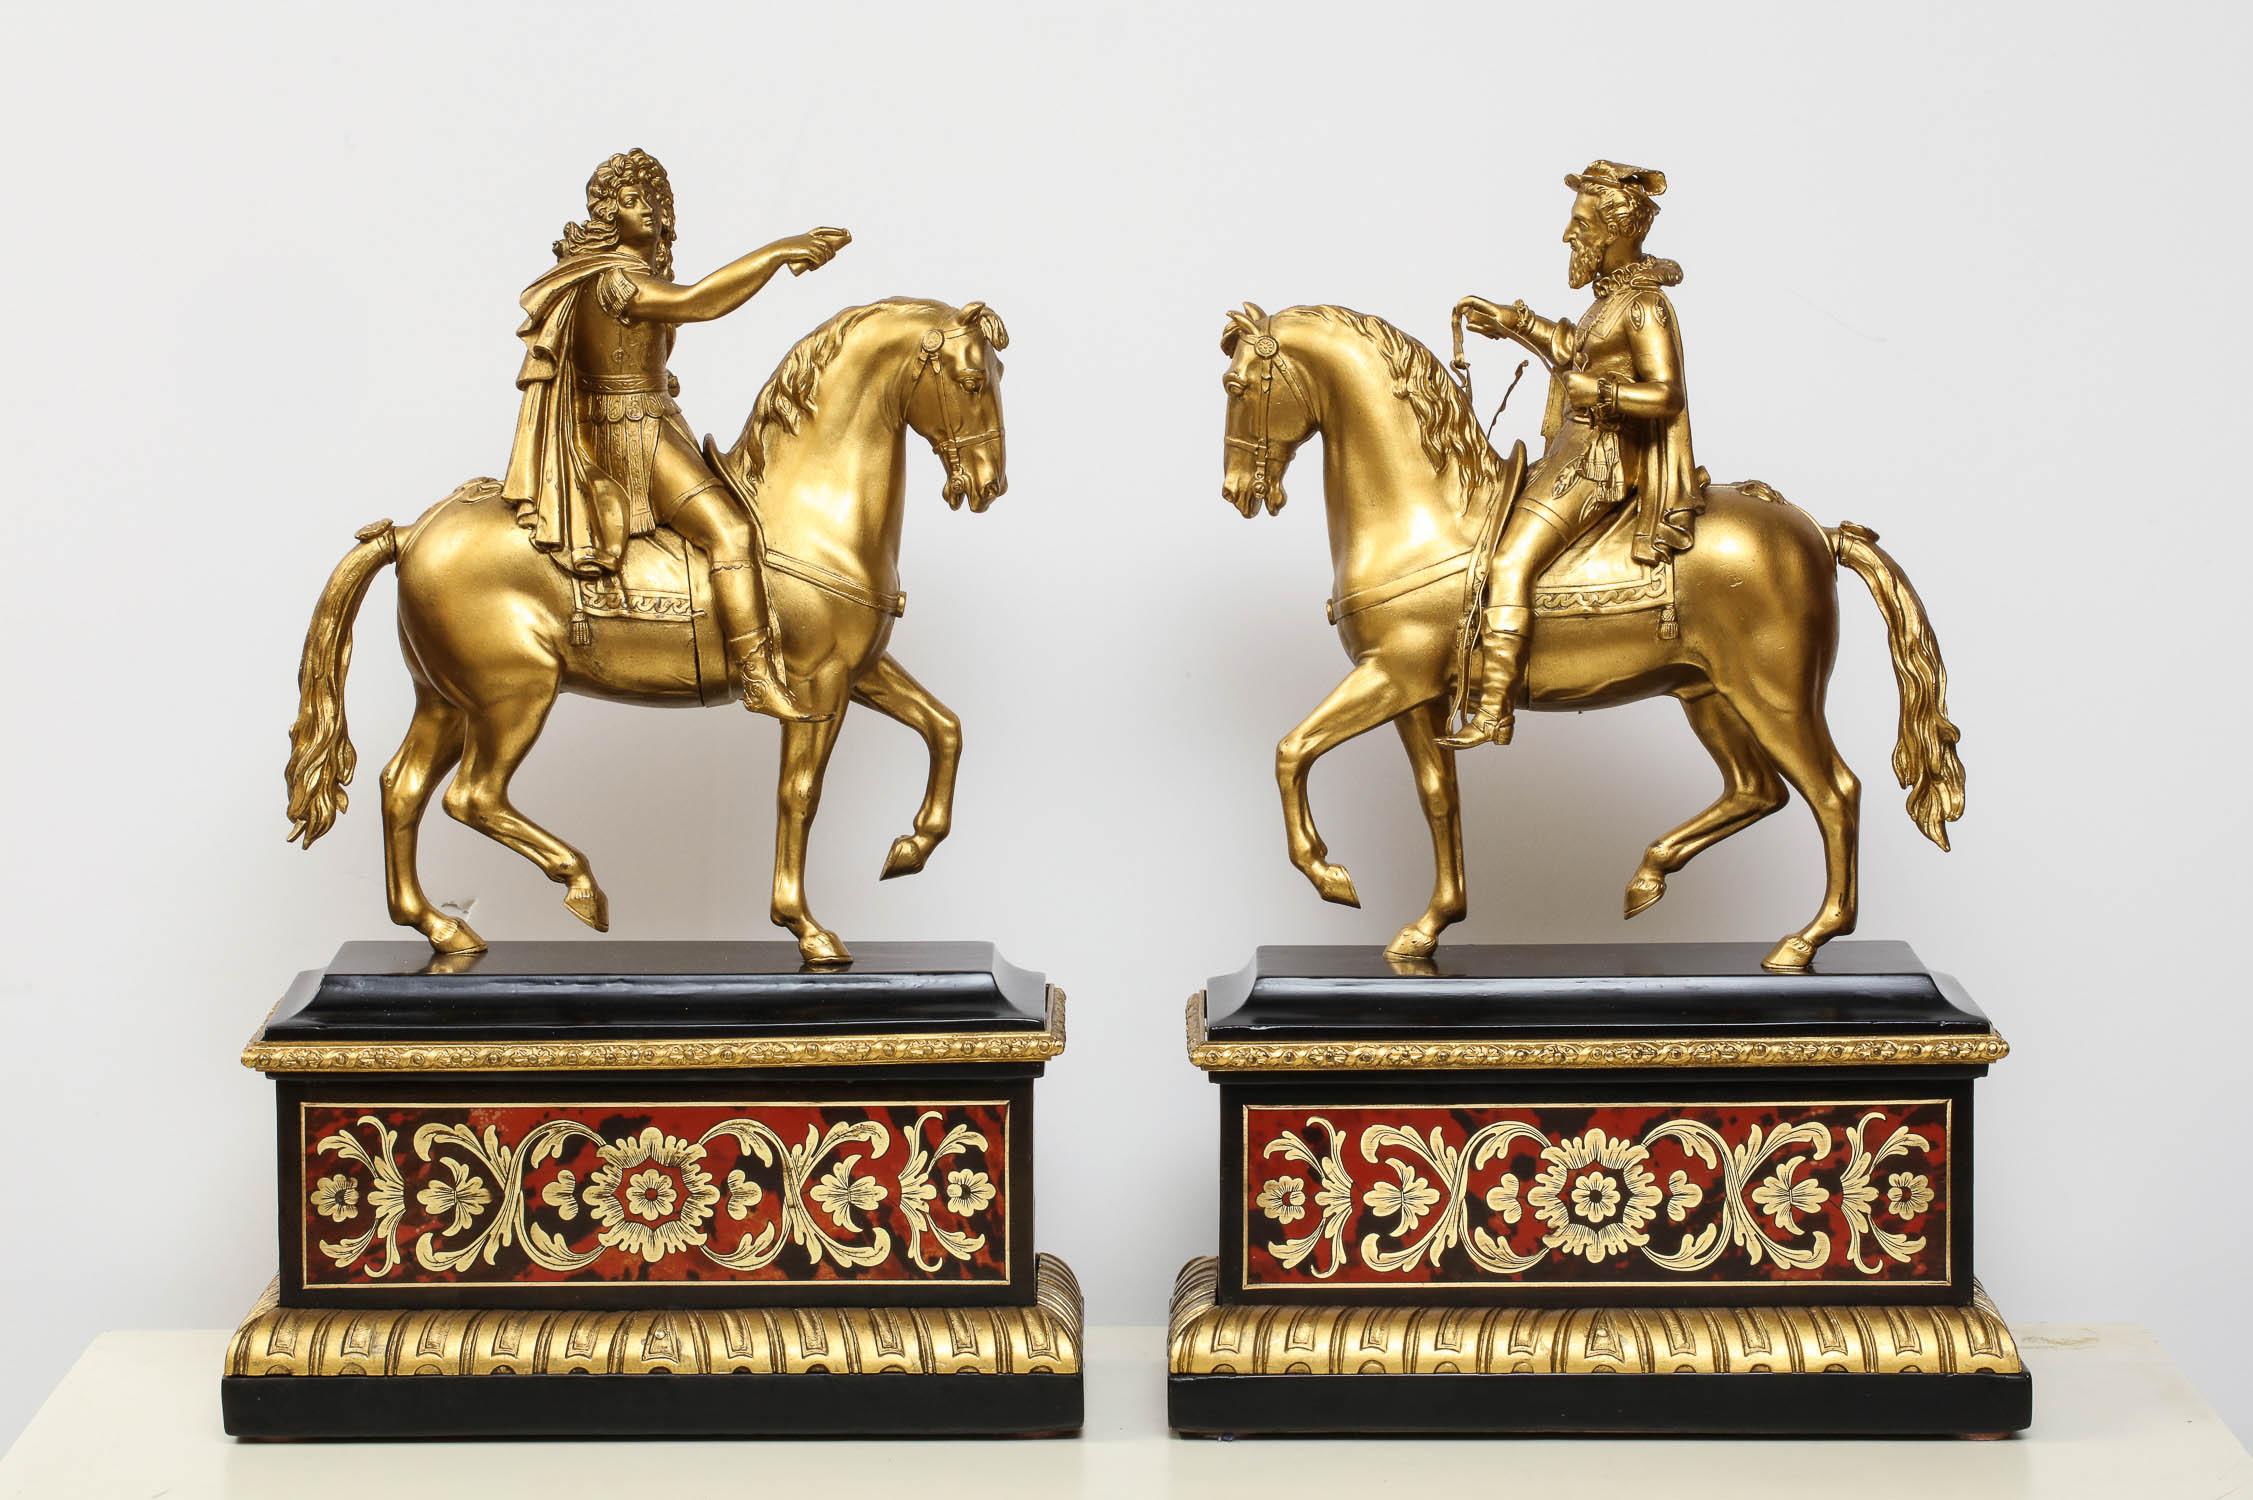 A pair of French gilt bronze figures on horses of Louis XIV & Francois I on Boulle bases,
circa 1890.

Very good quality, excellent condition.
(can be used as bookends)

Measures: 16